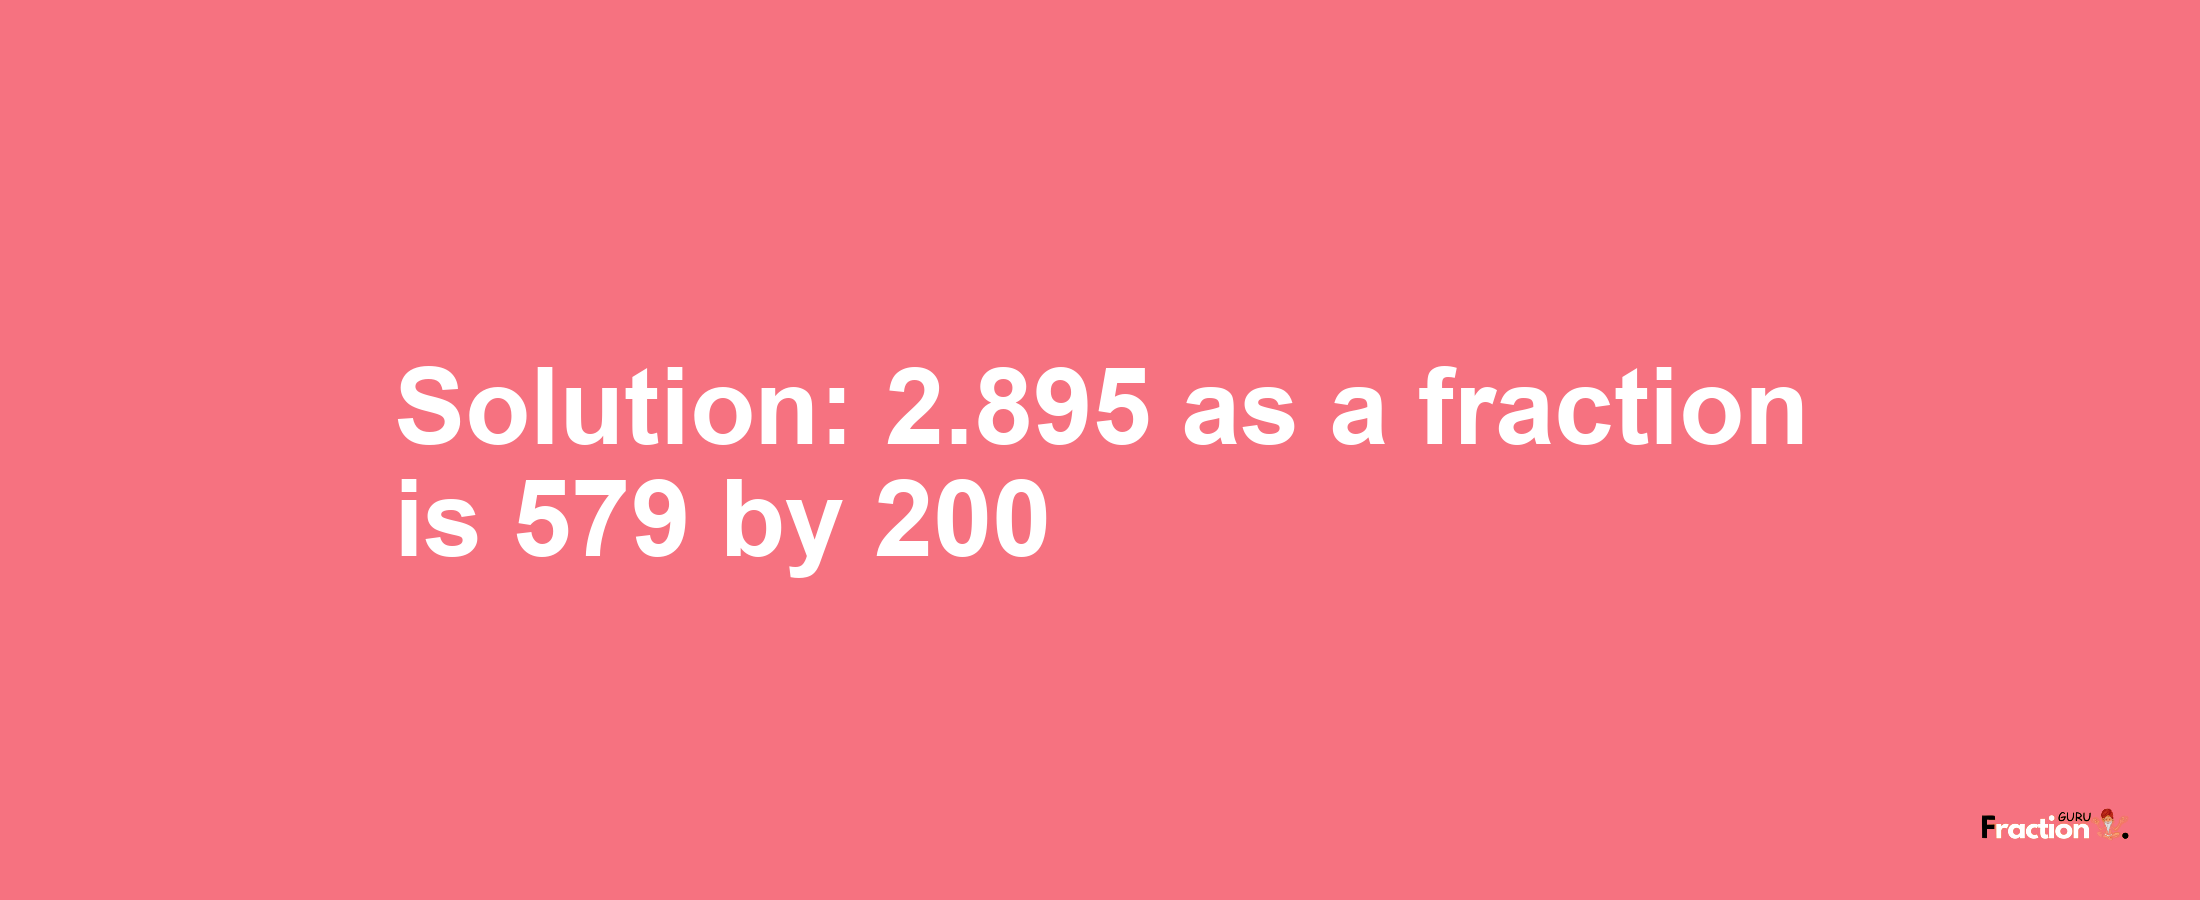 Solution:2.895 as a fraction is 579/200